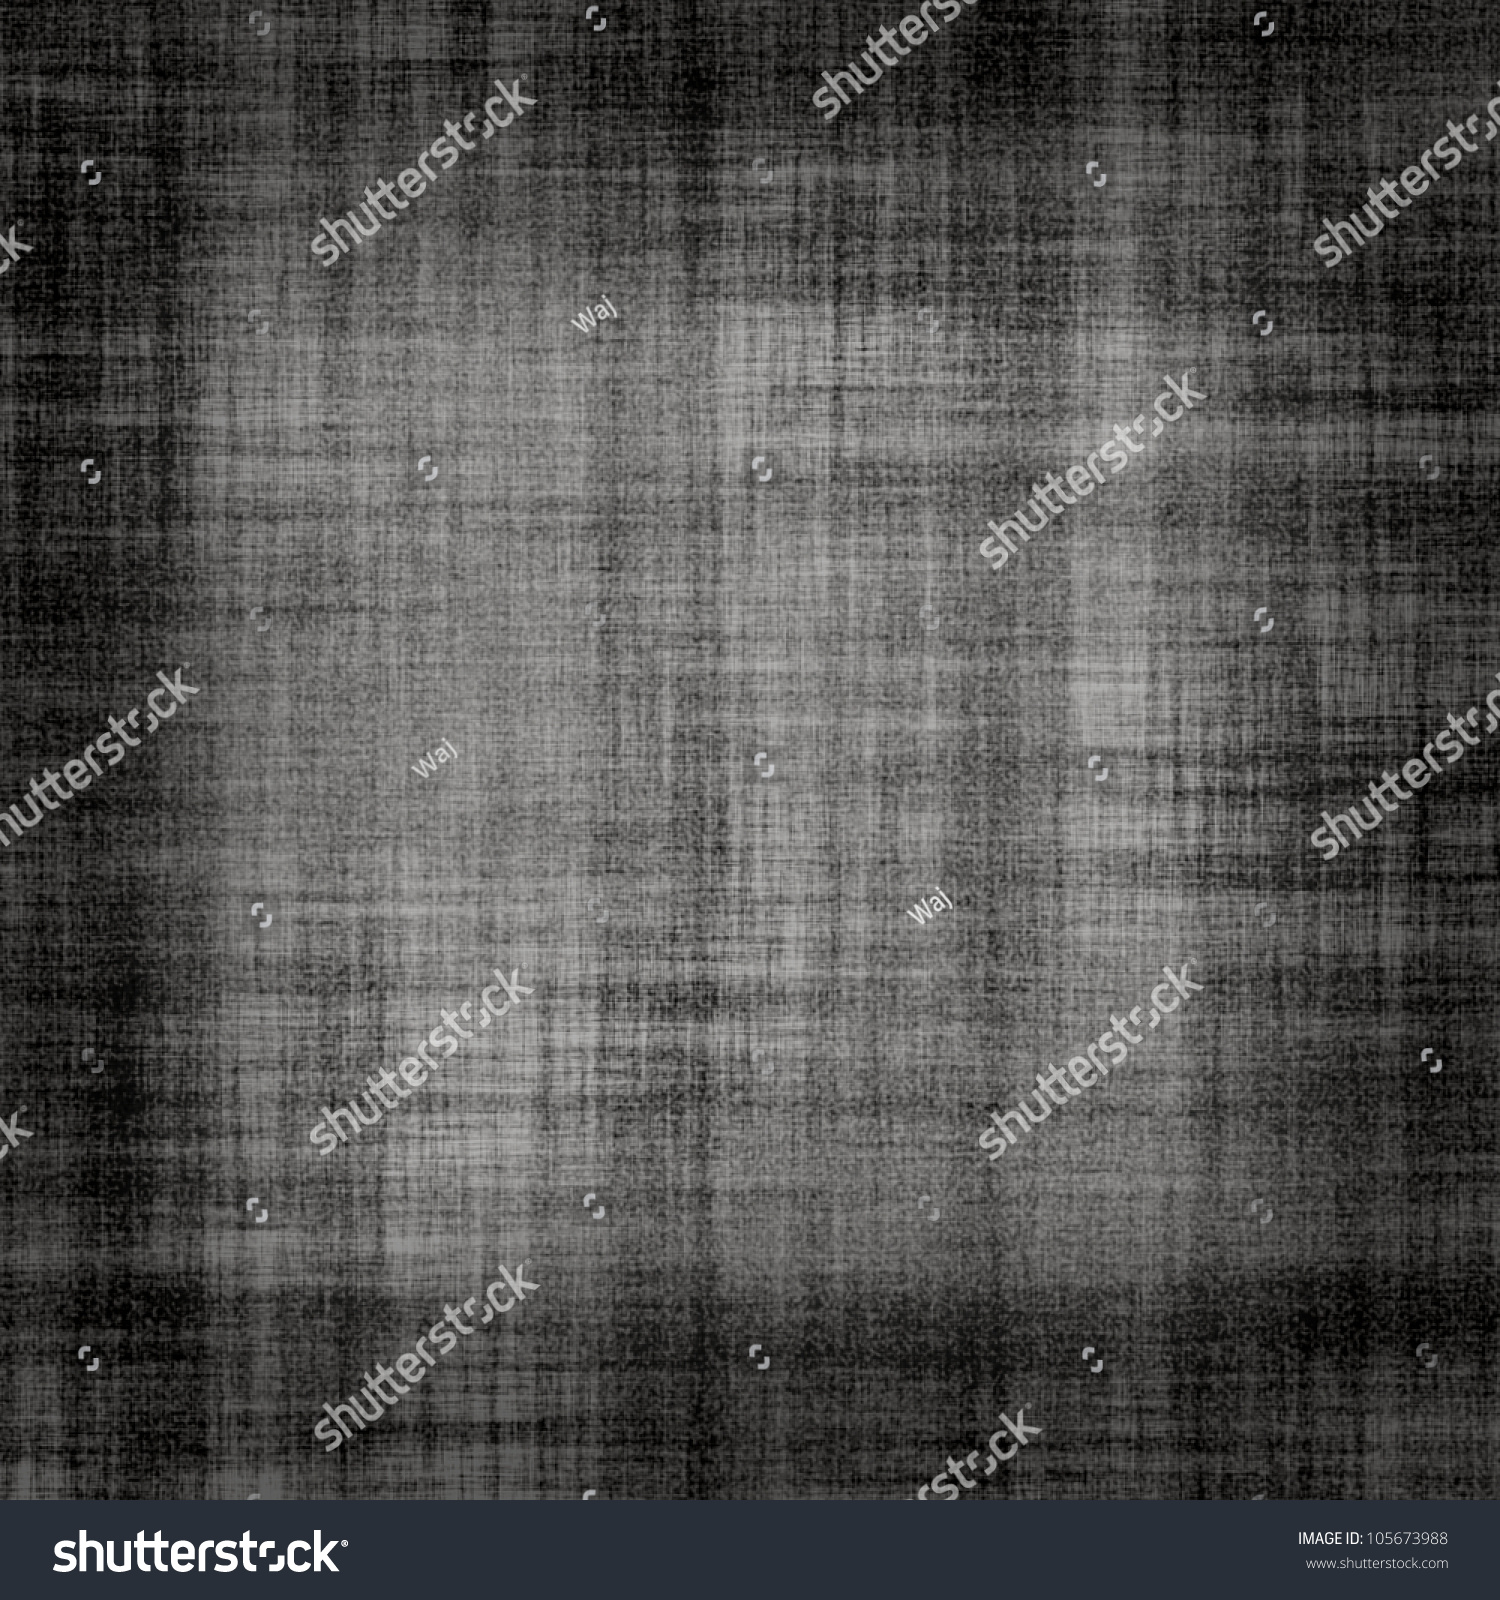 Black Texture For Background Stock Photo 105673988 : Shutterstock